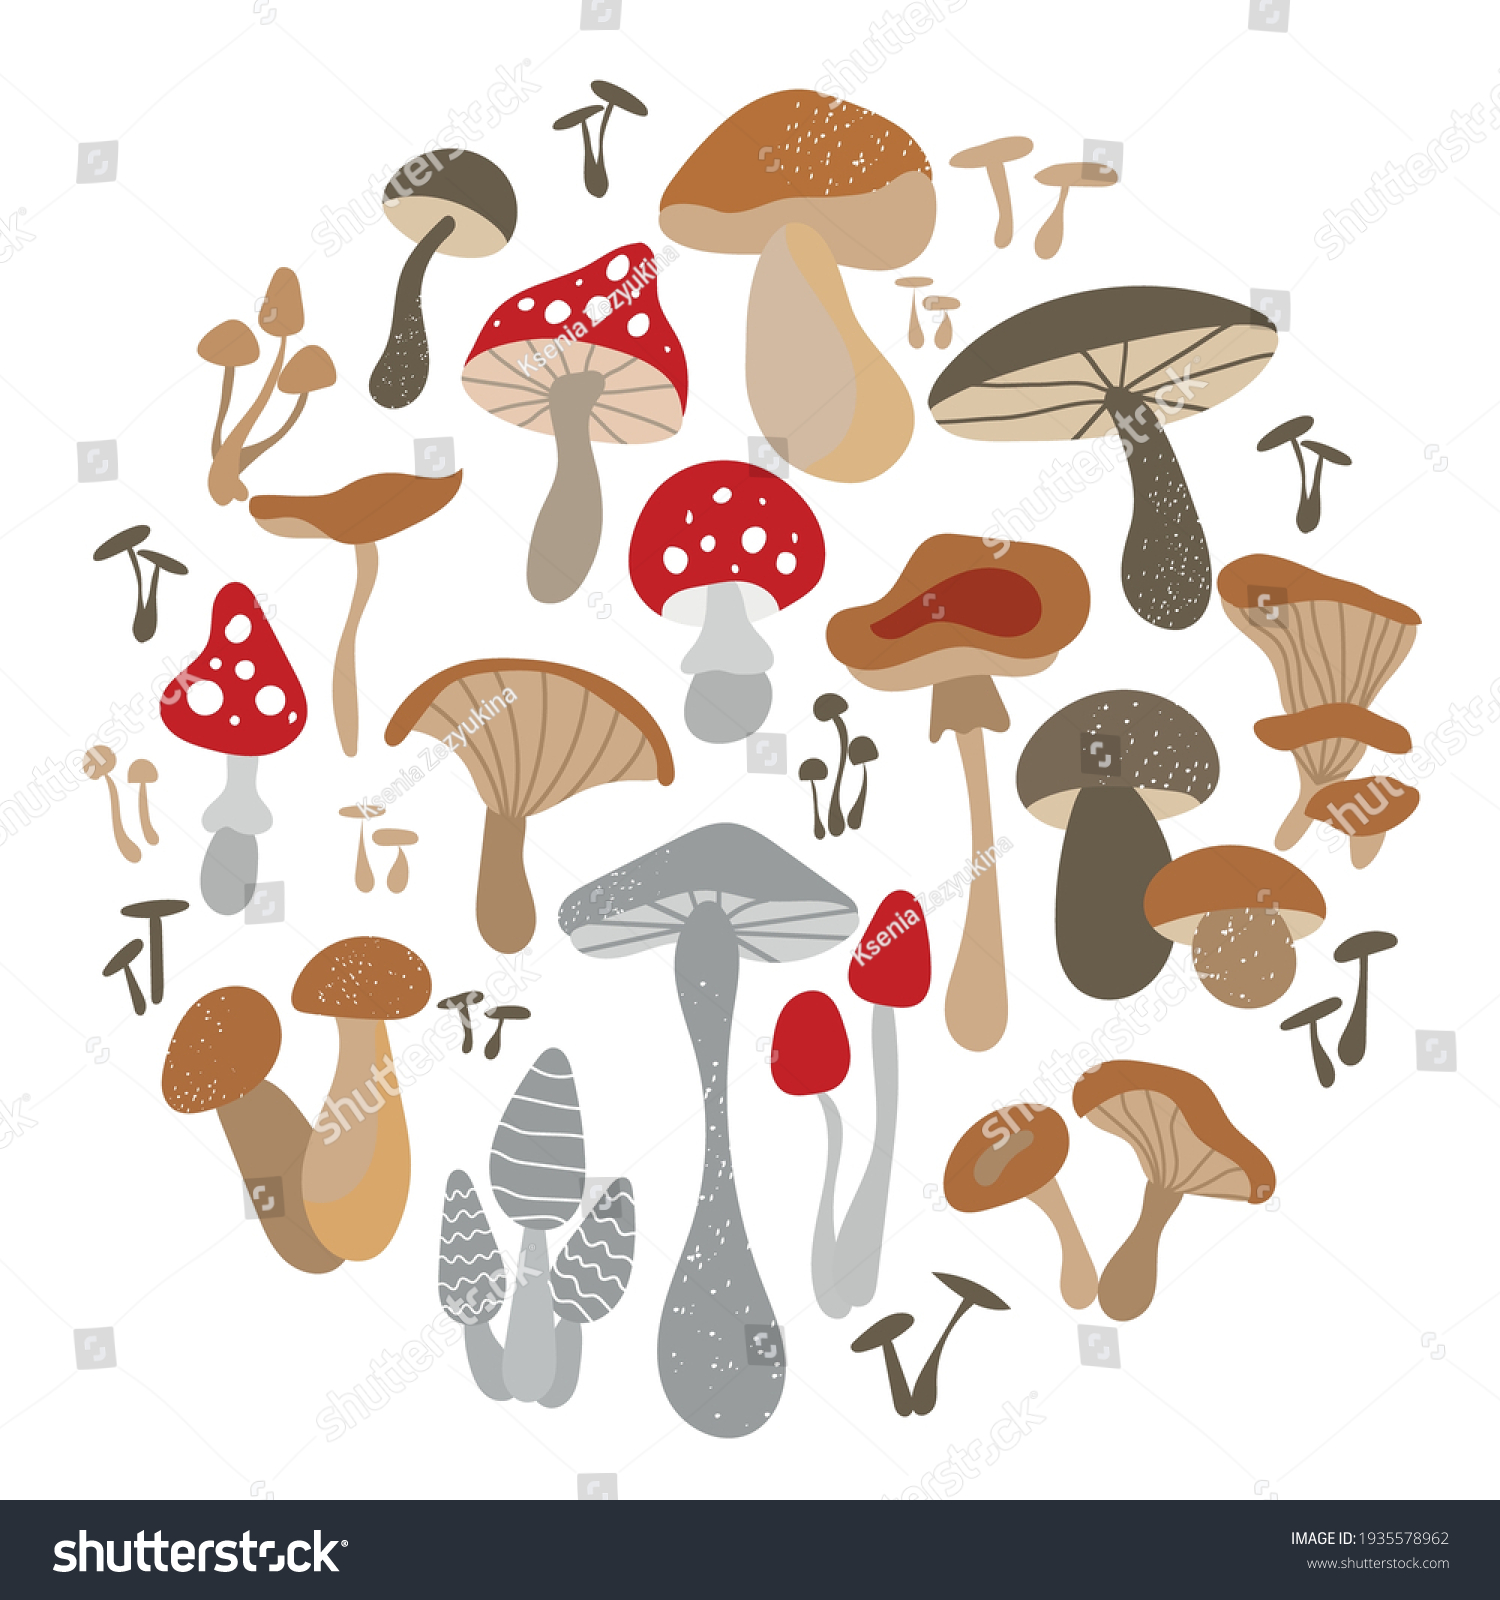 Mushroom set of vector illustrations isolated on white. White mushroom, chanterelles, honey agarics, mushrooms, fly agarics, morels. A set of ingredients for the witch's potion. Cartoon style. #1935578962